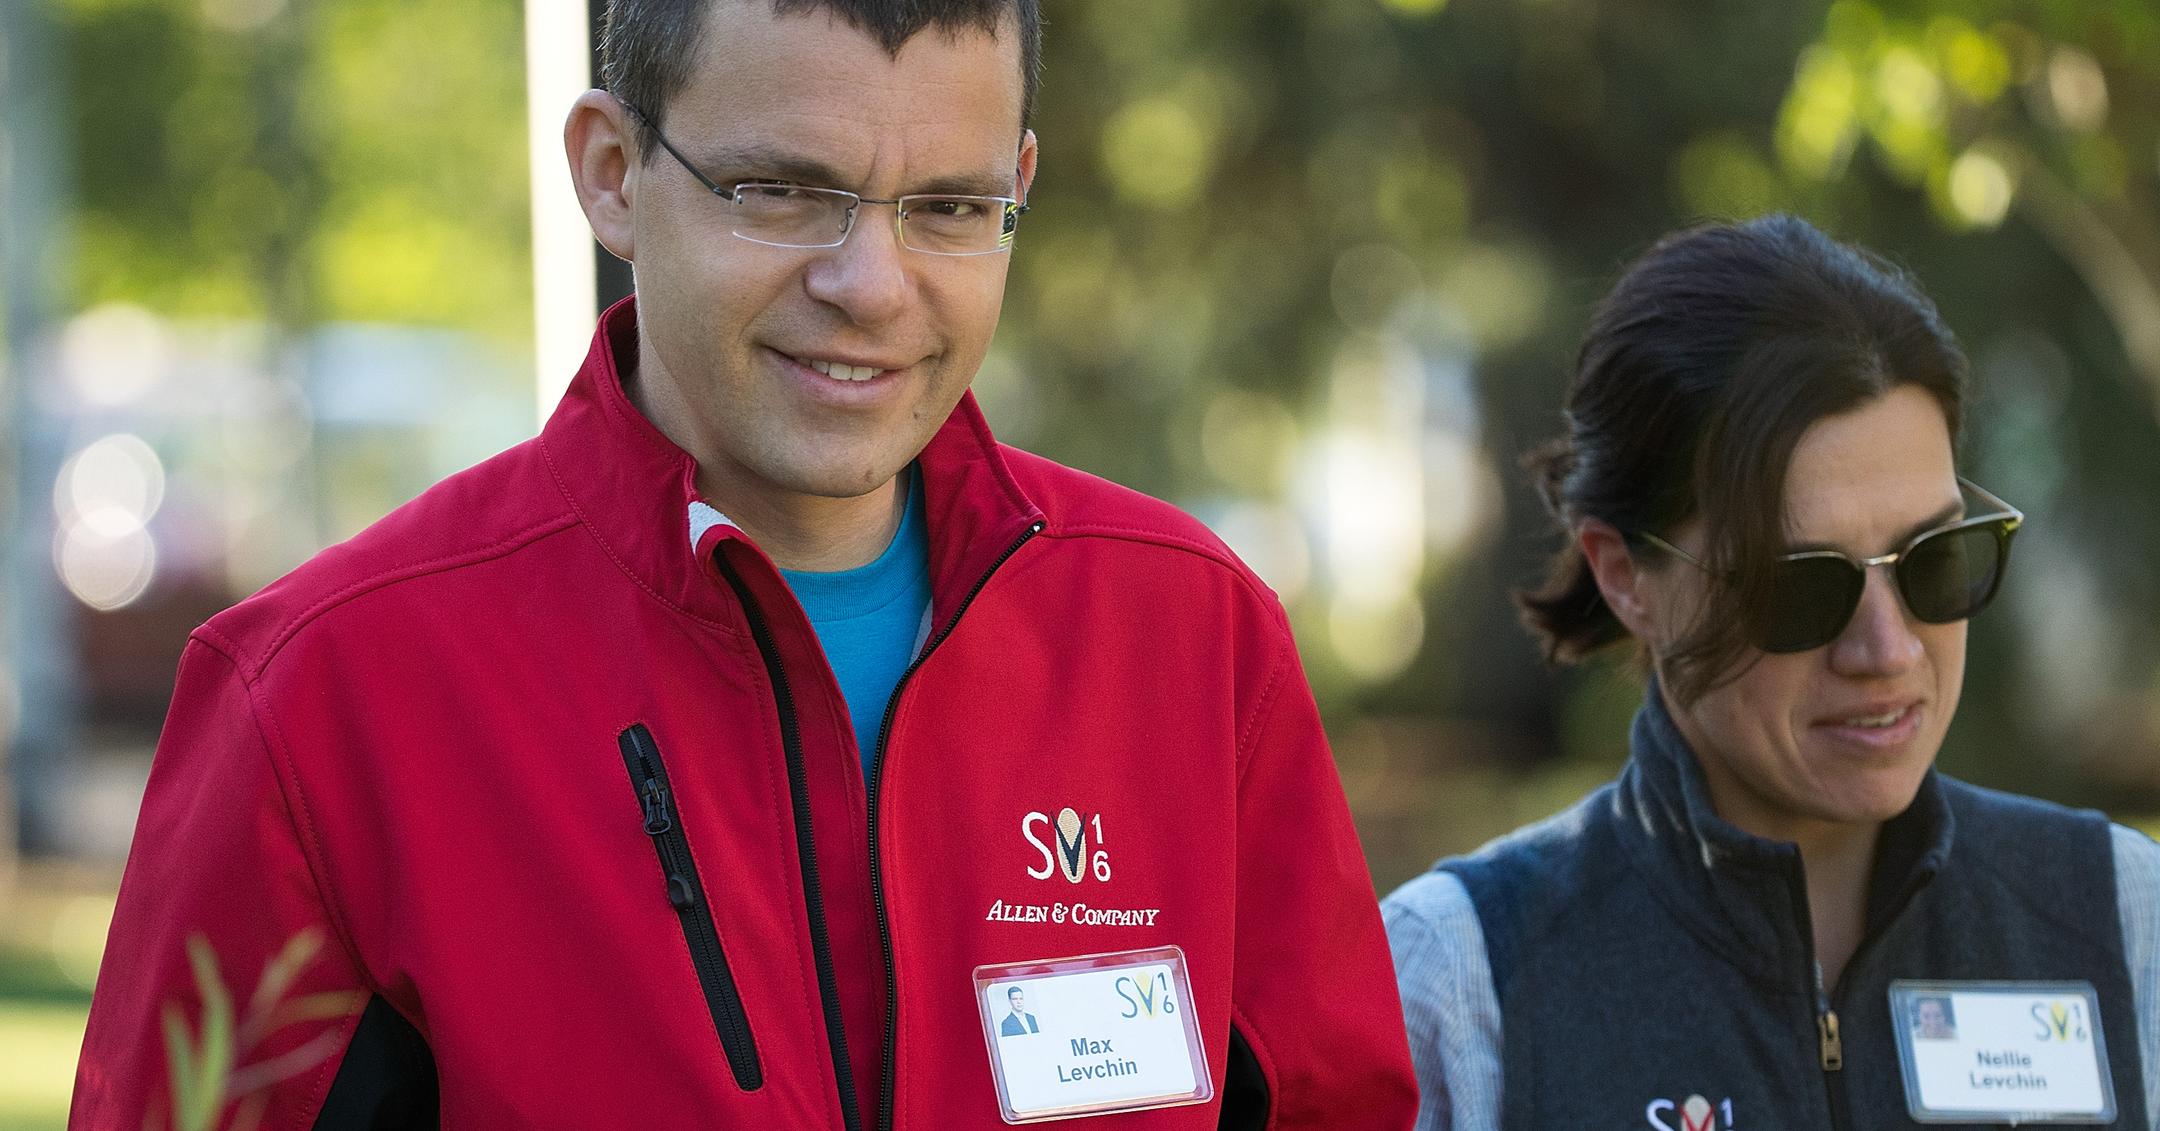 What Is Max Levchin's Net Worth and Is He a Billionaire?